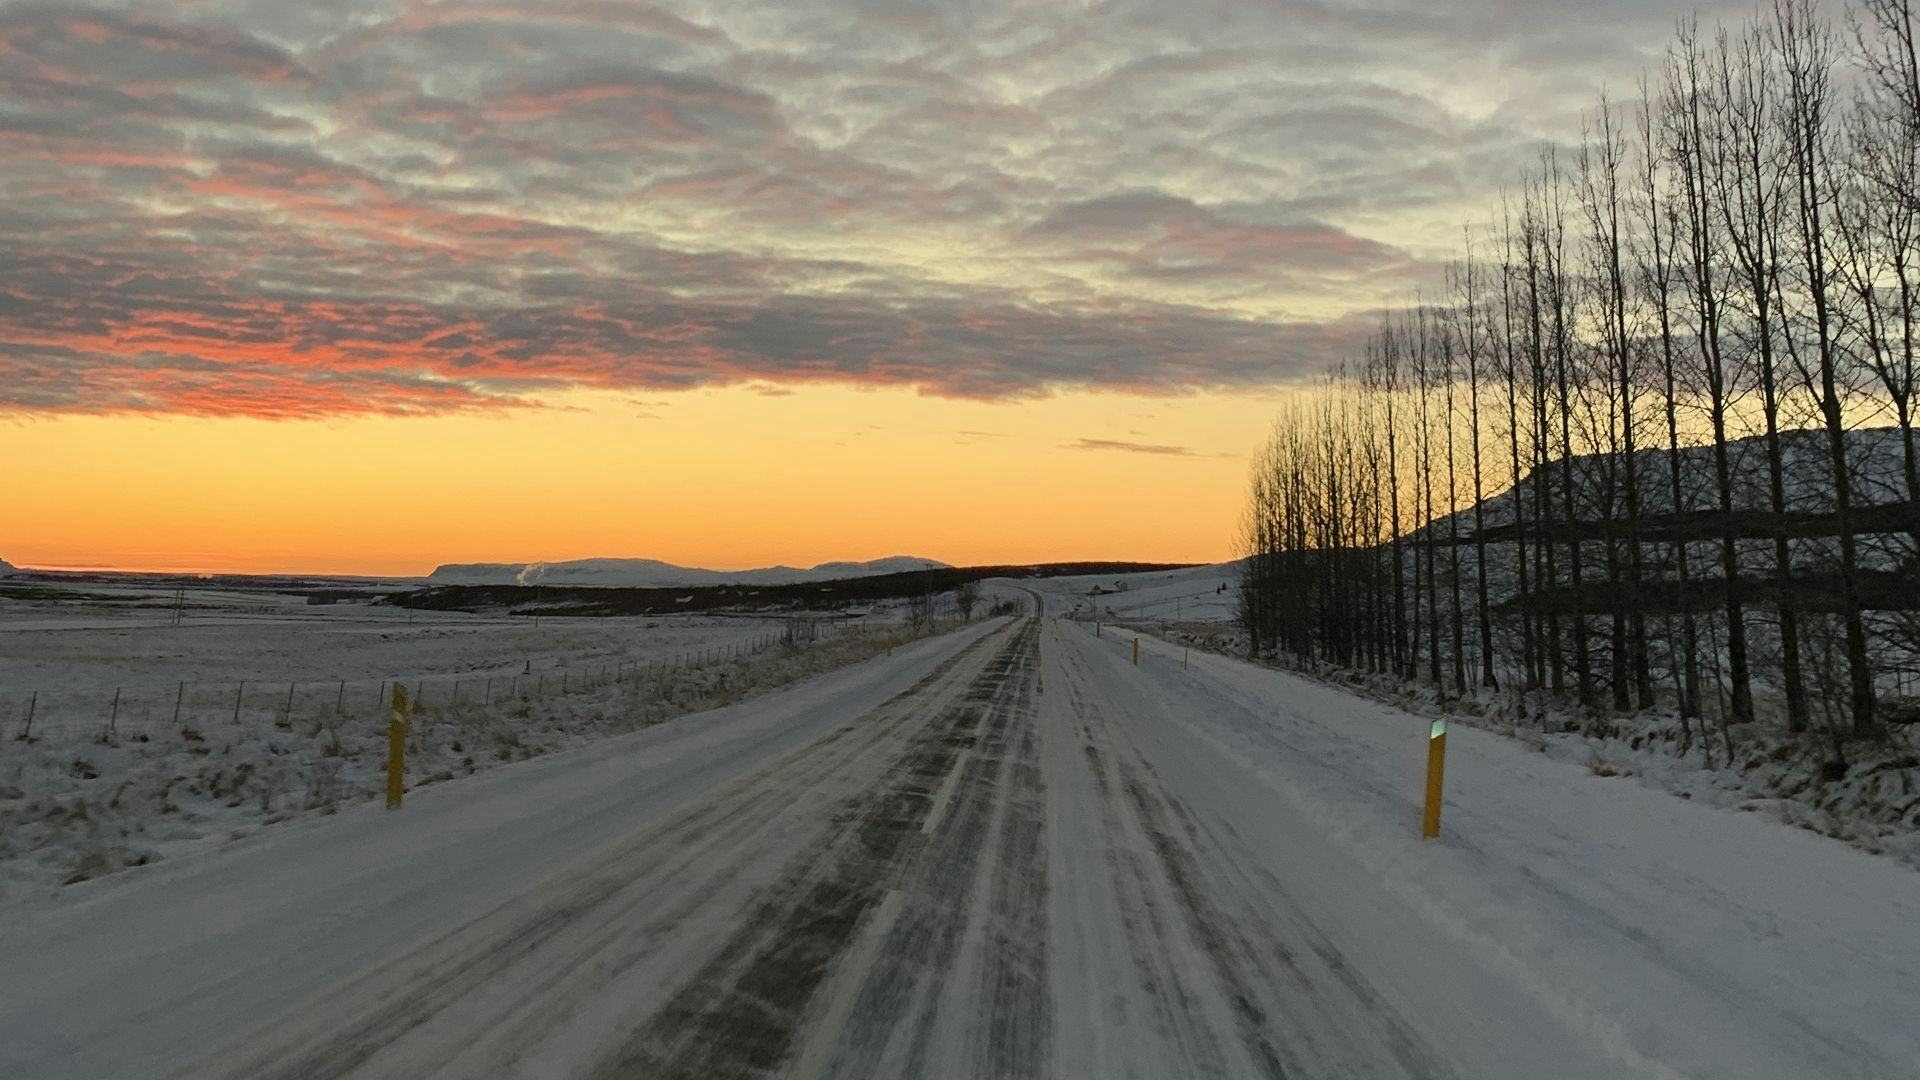 A snow covered road leading into the distance under sunset sky 